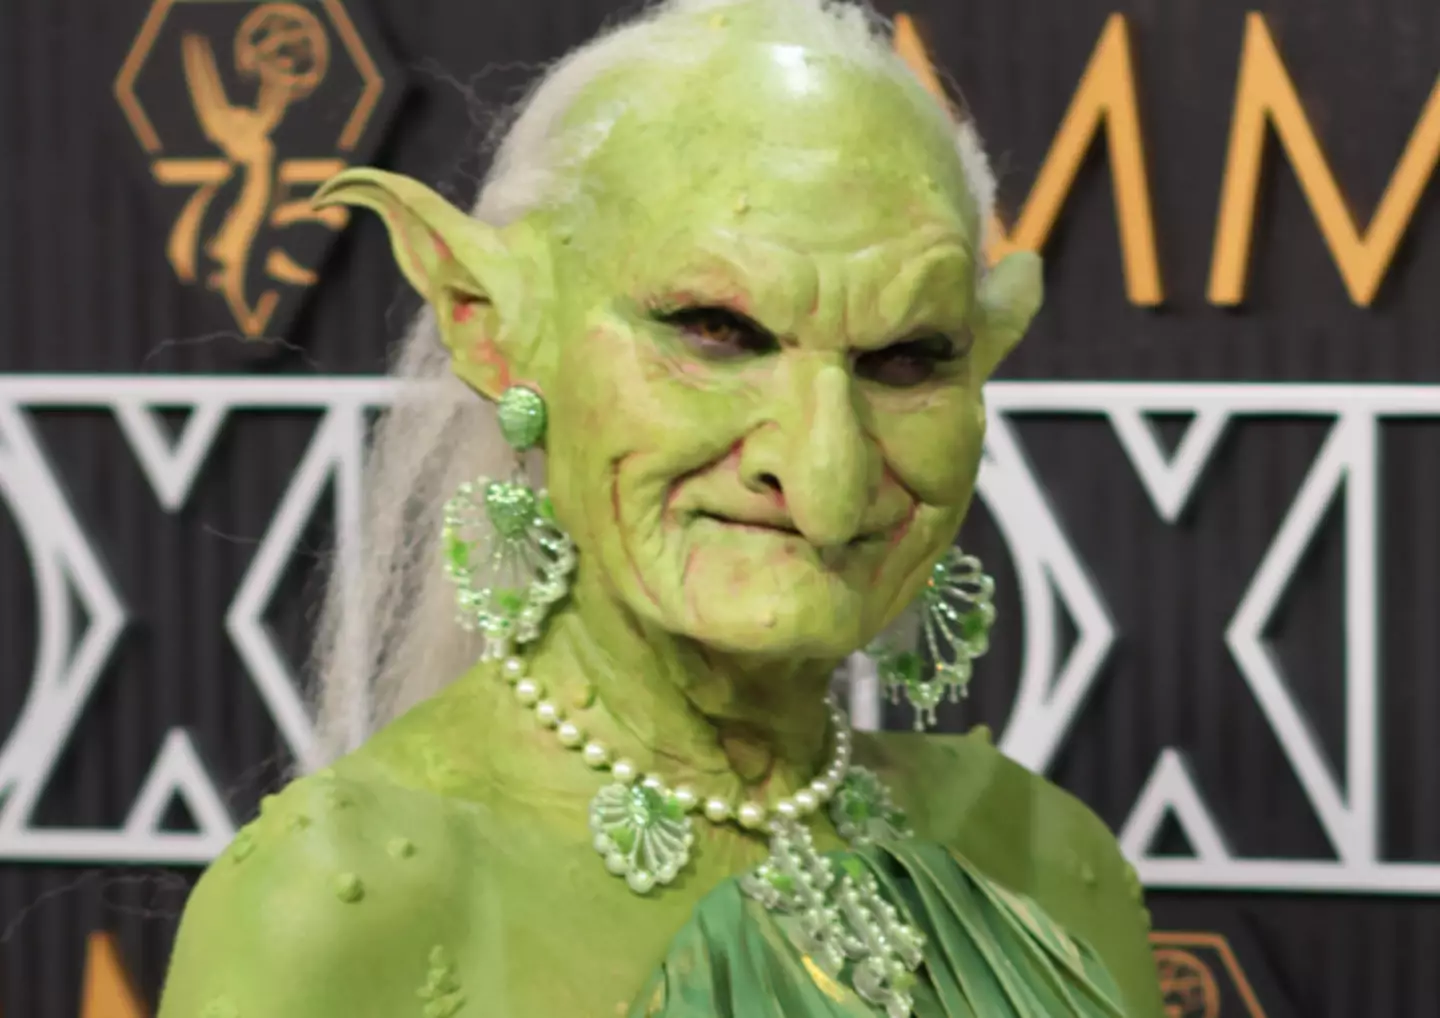 Who was the green goblin at the Emmys?